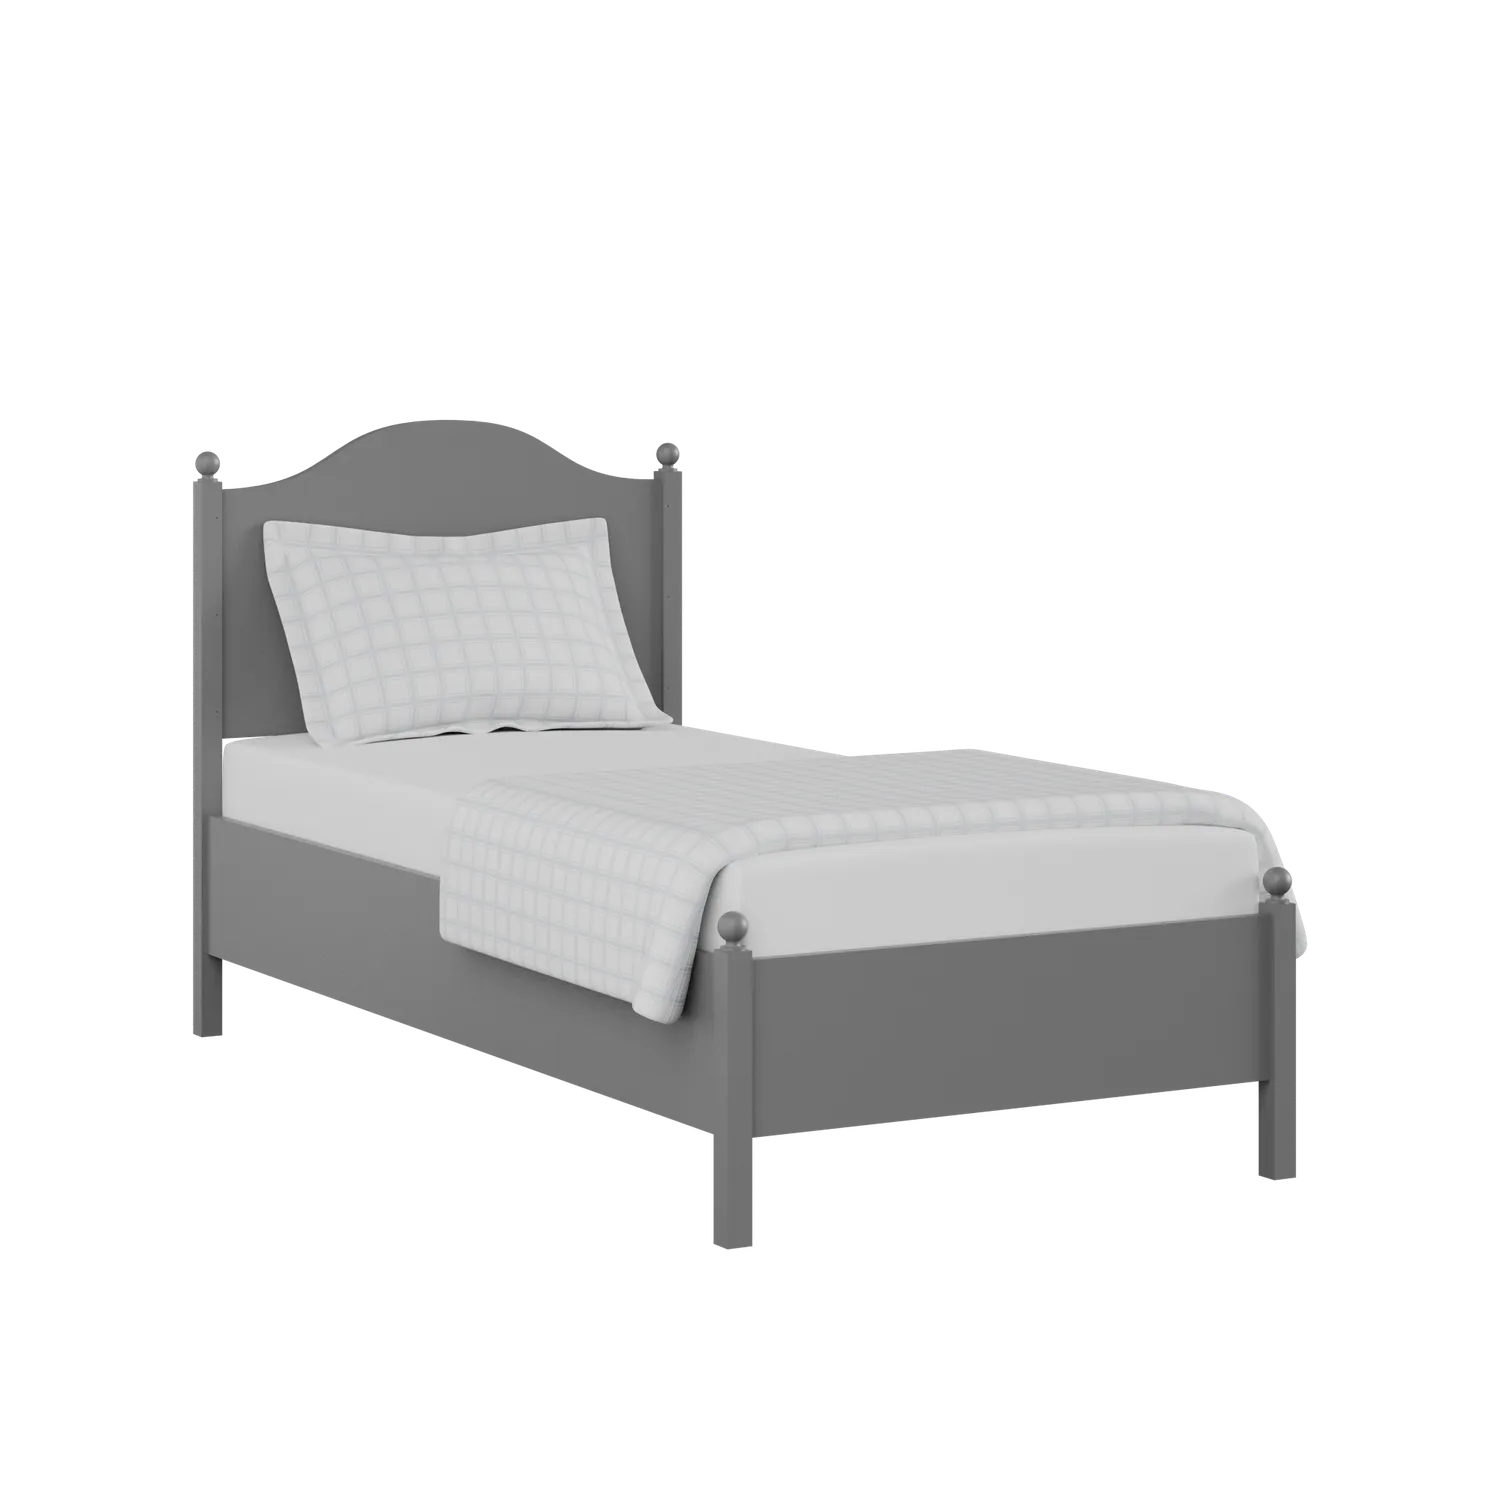 Brady Painted single painted wood bed in grey with Juno mattress